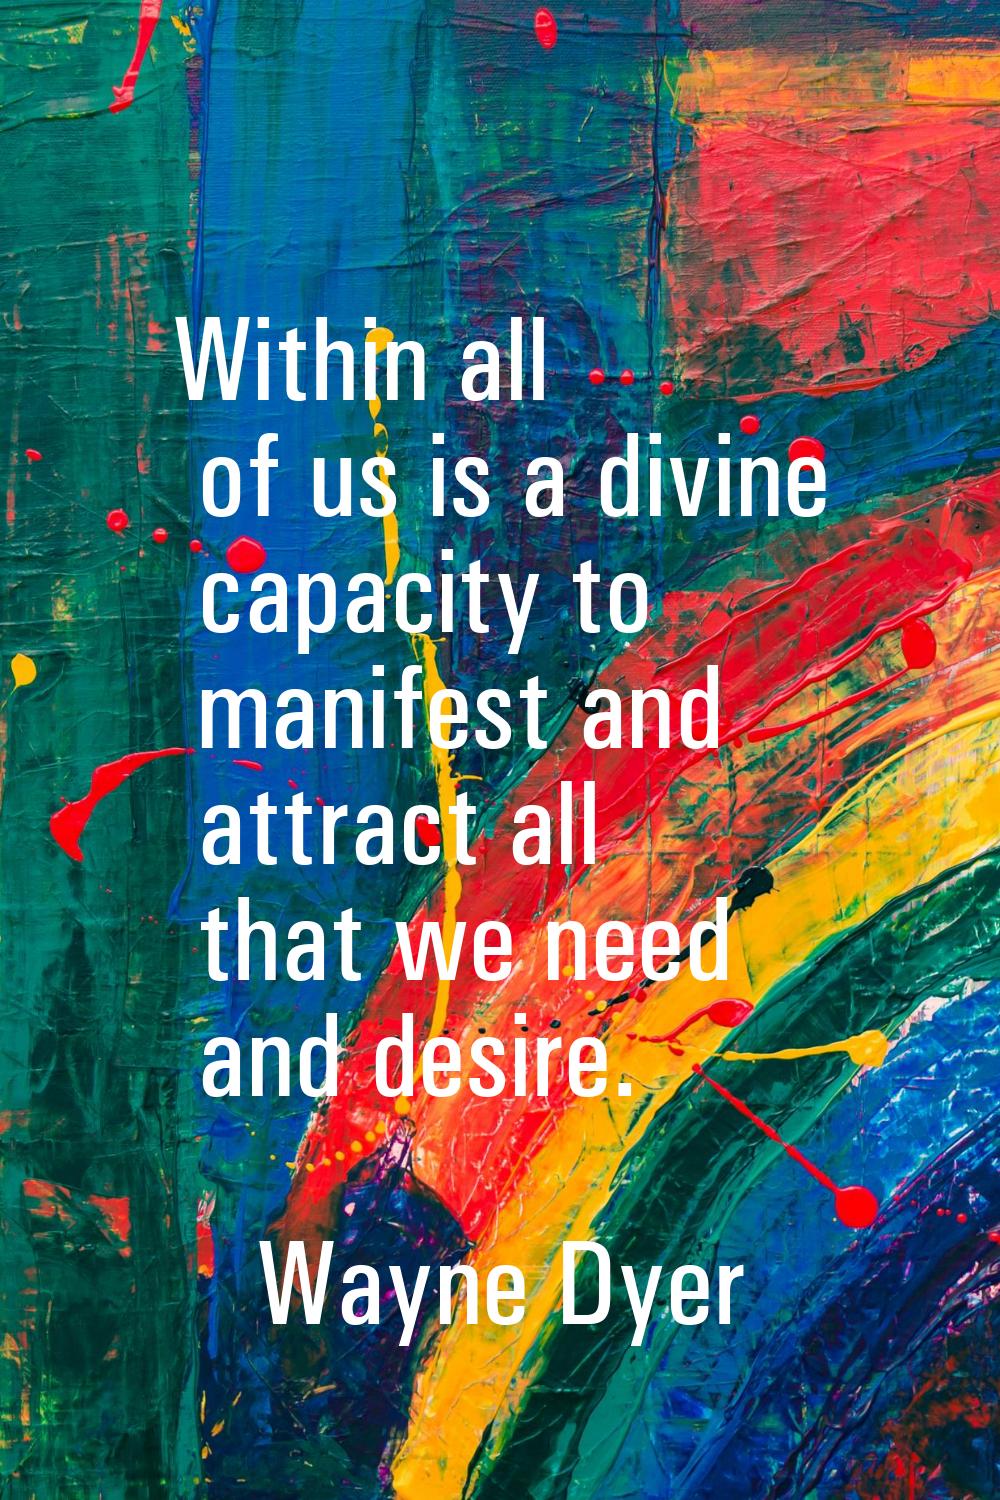 Within all of us is a divine capacity to manifest and attract all that we need and desire.